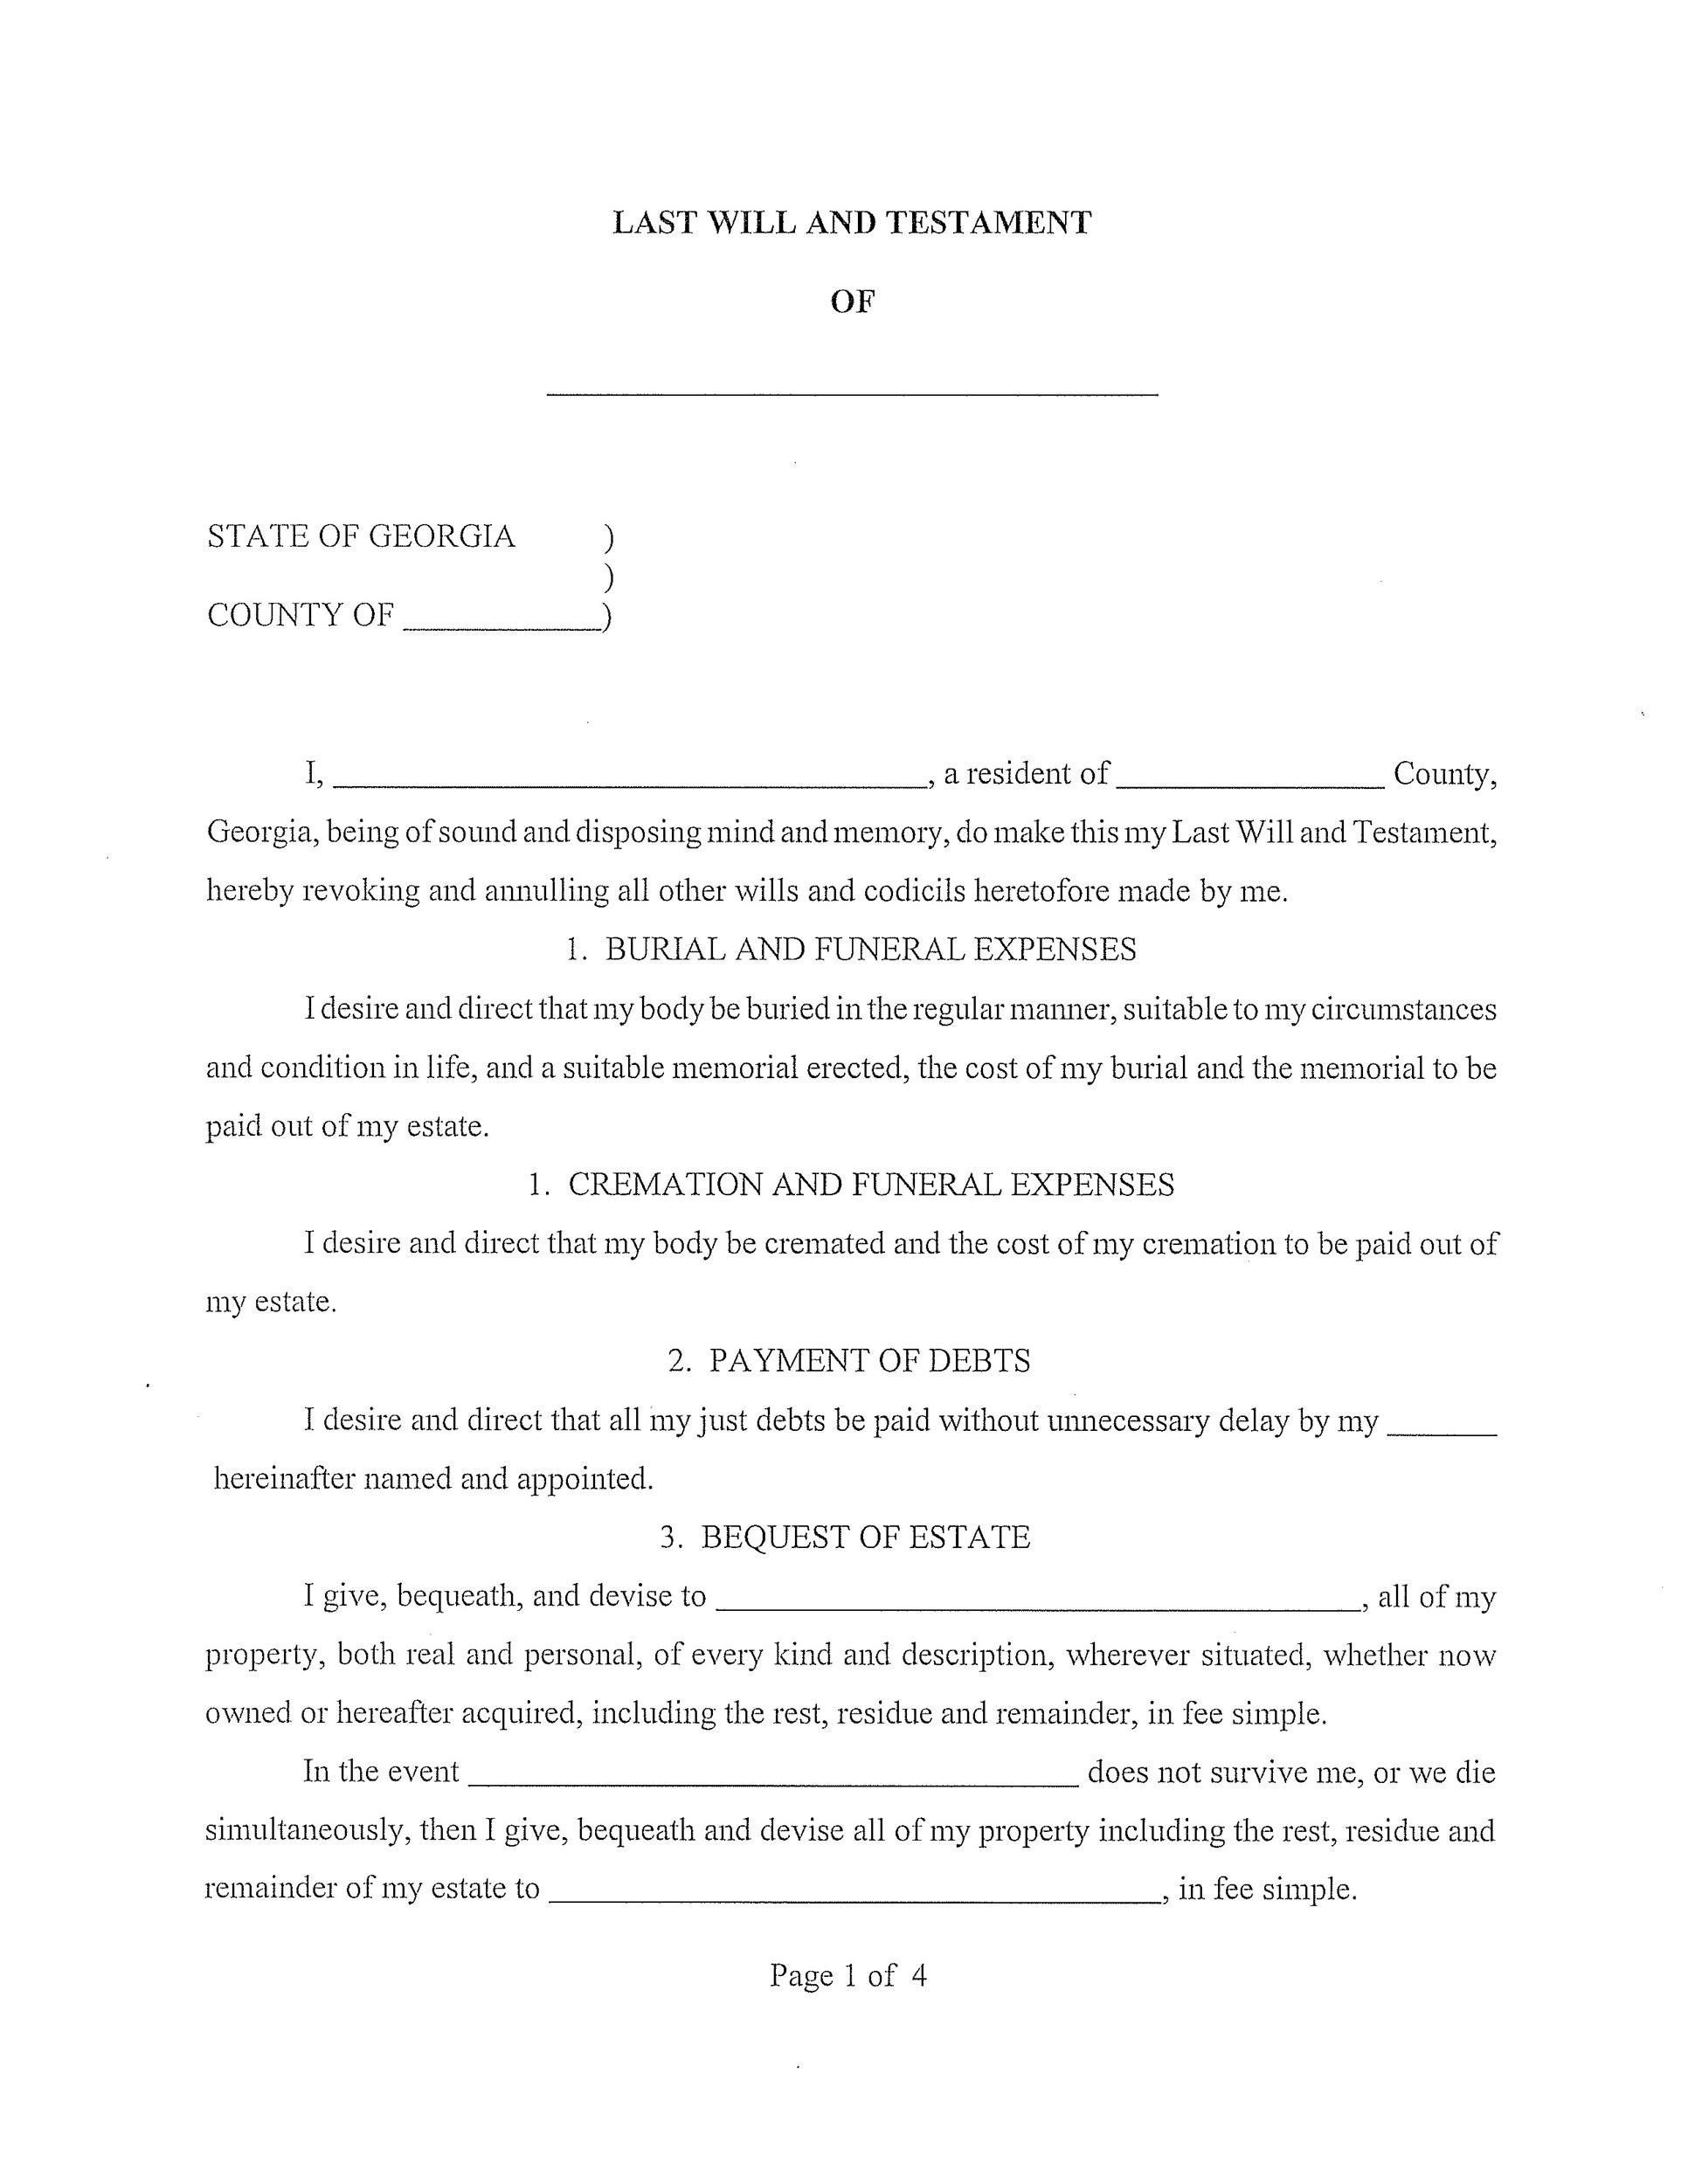 Last Will And Testament Template Wisconsin